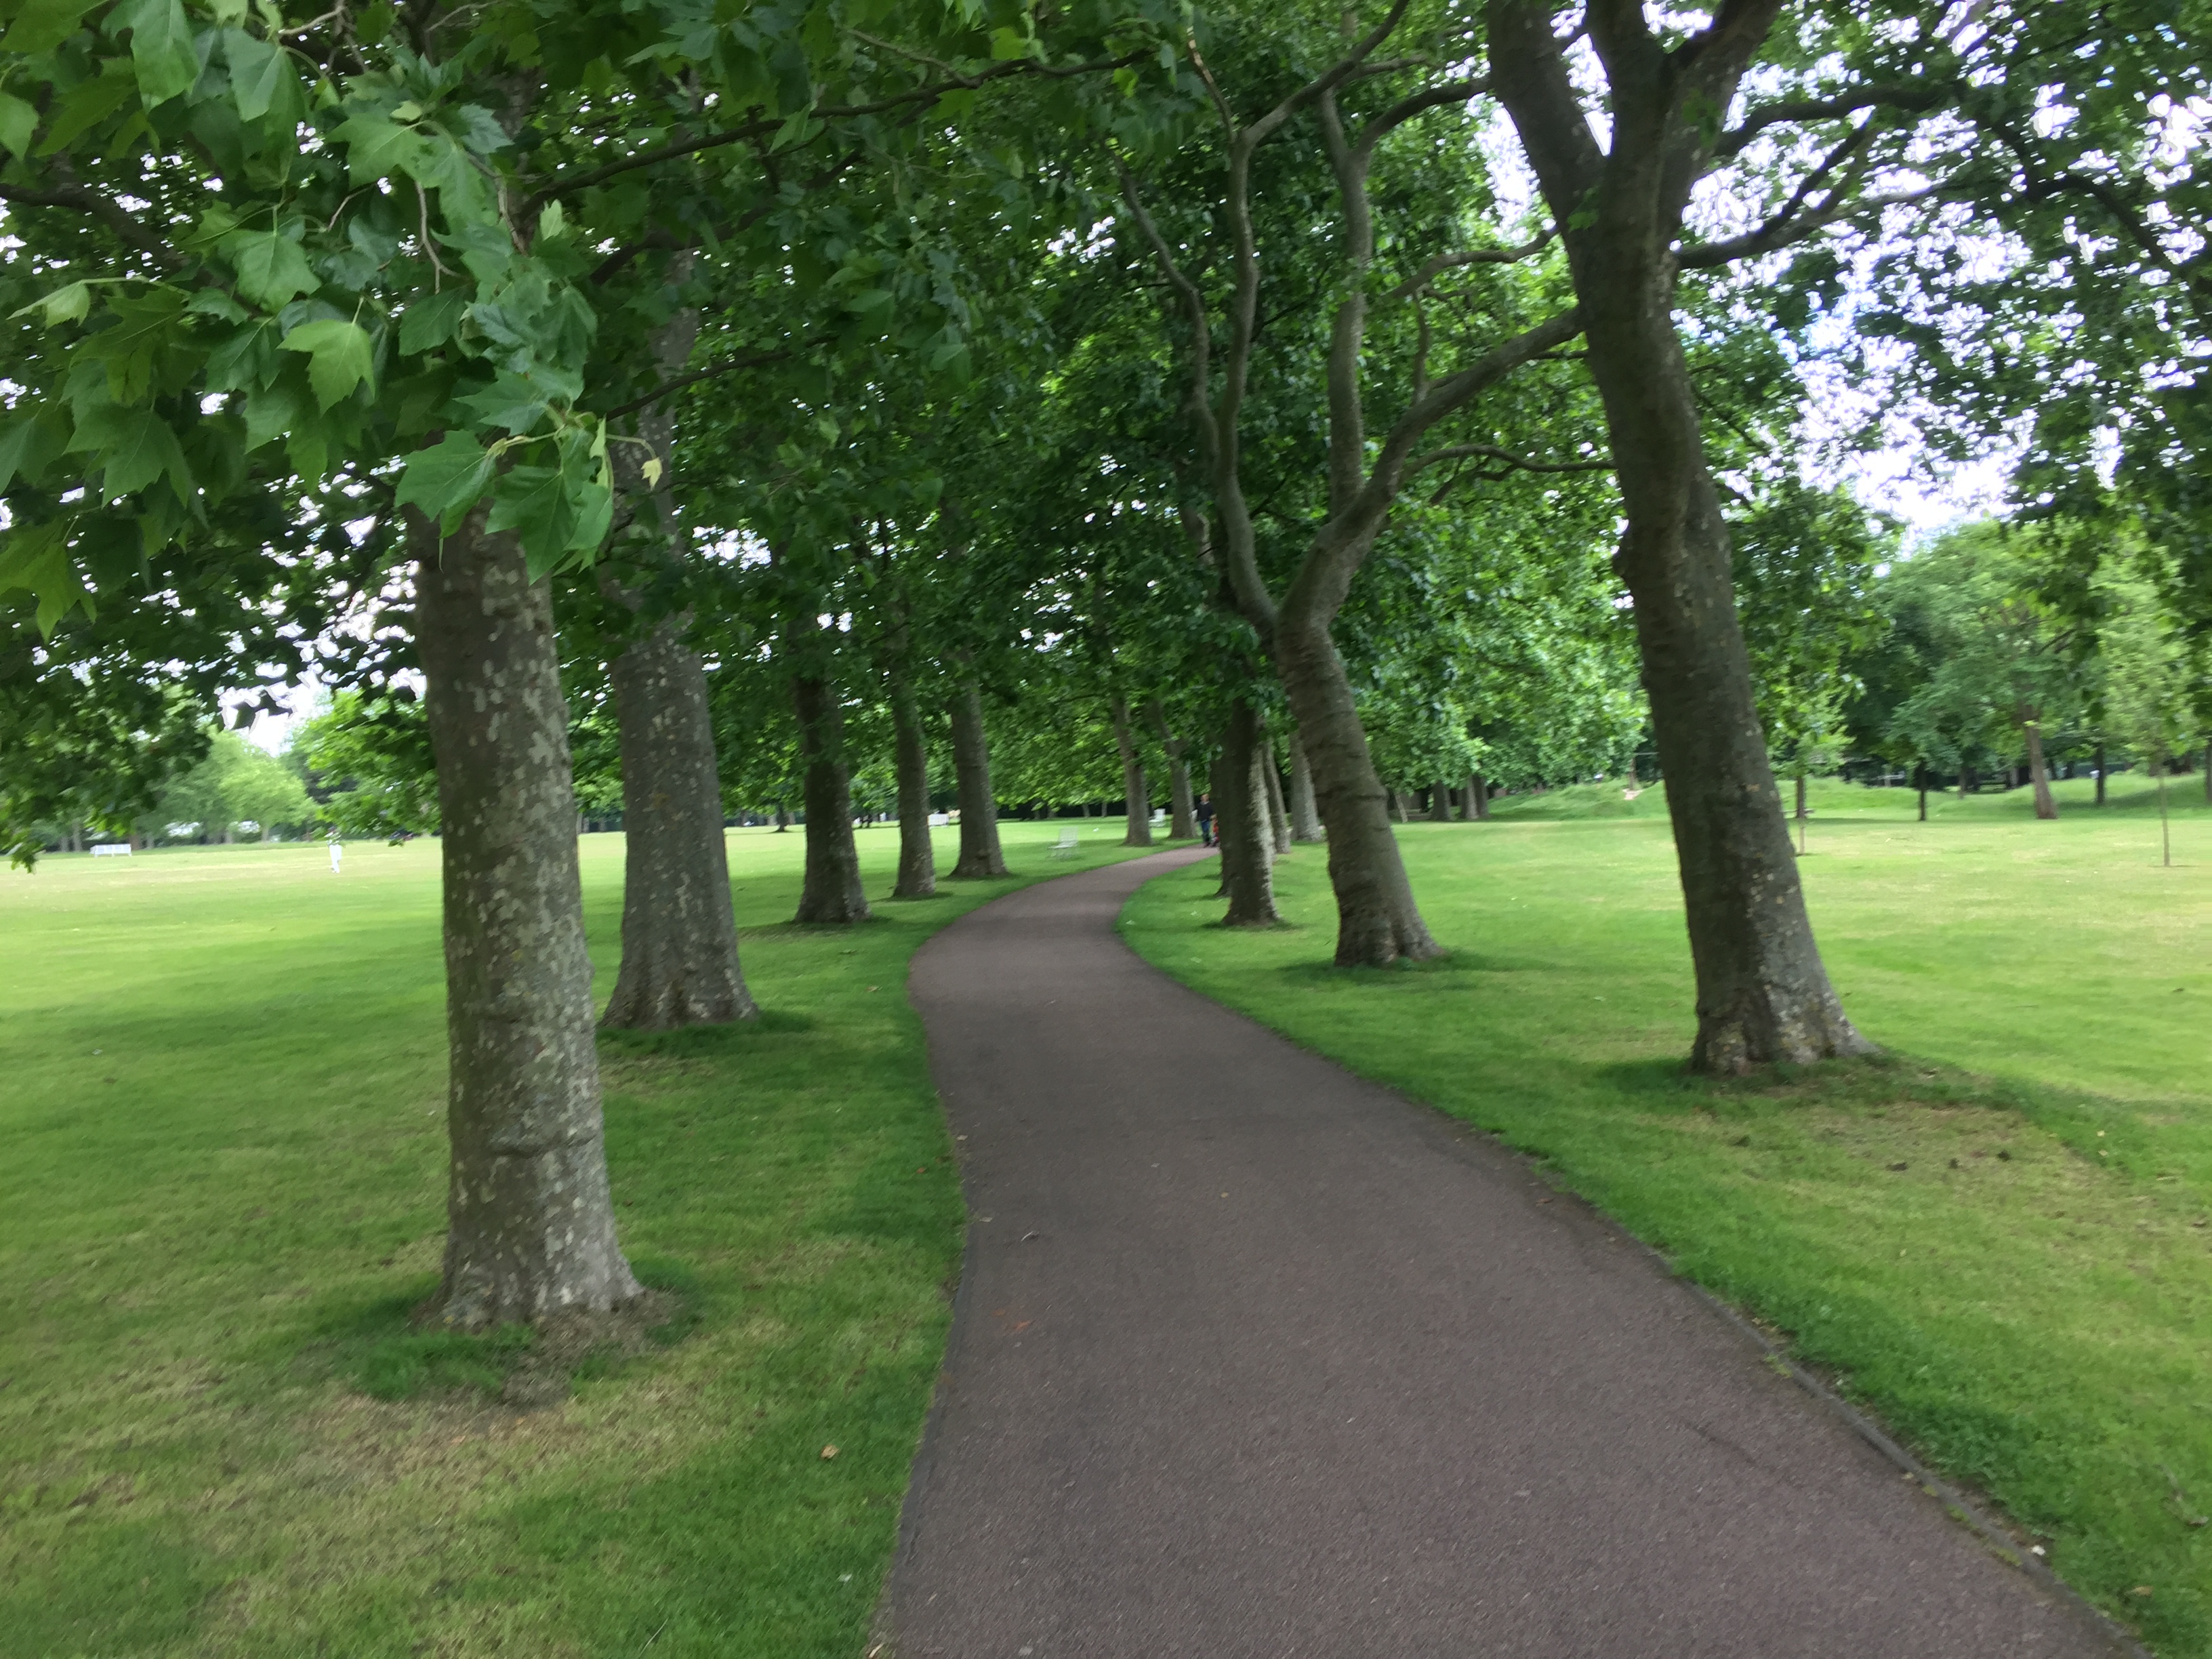 A curving tree-lined path, with grass on each side, in West Ham Park.